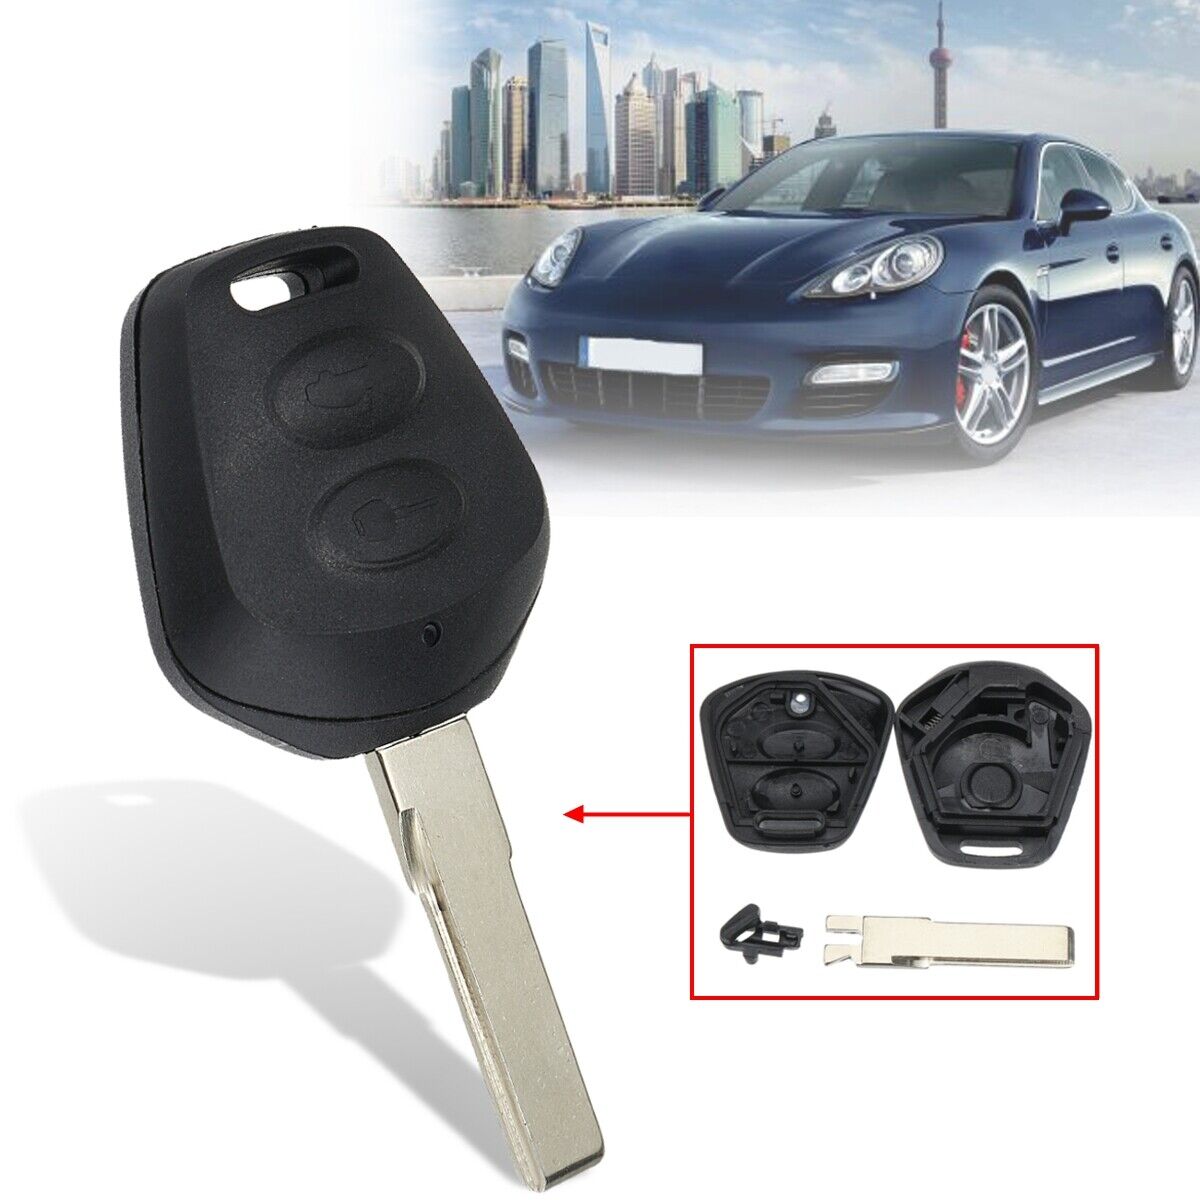 2 Button Remote Key Fob Case Shell Replacement For Porsche Boxster S 911 986 996